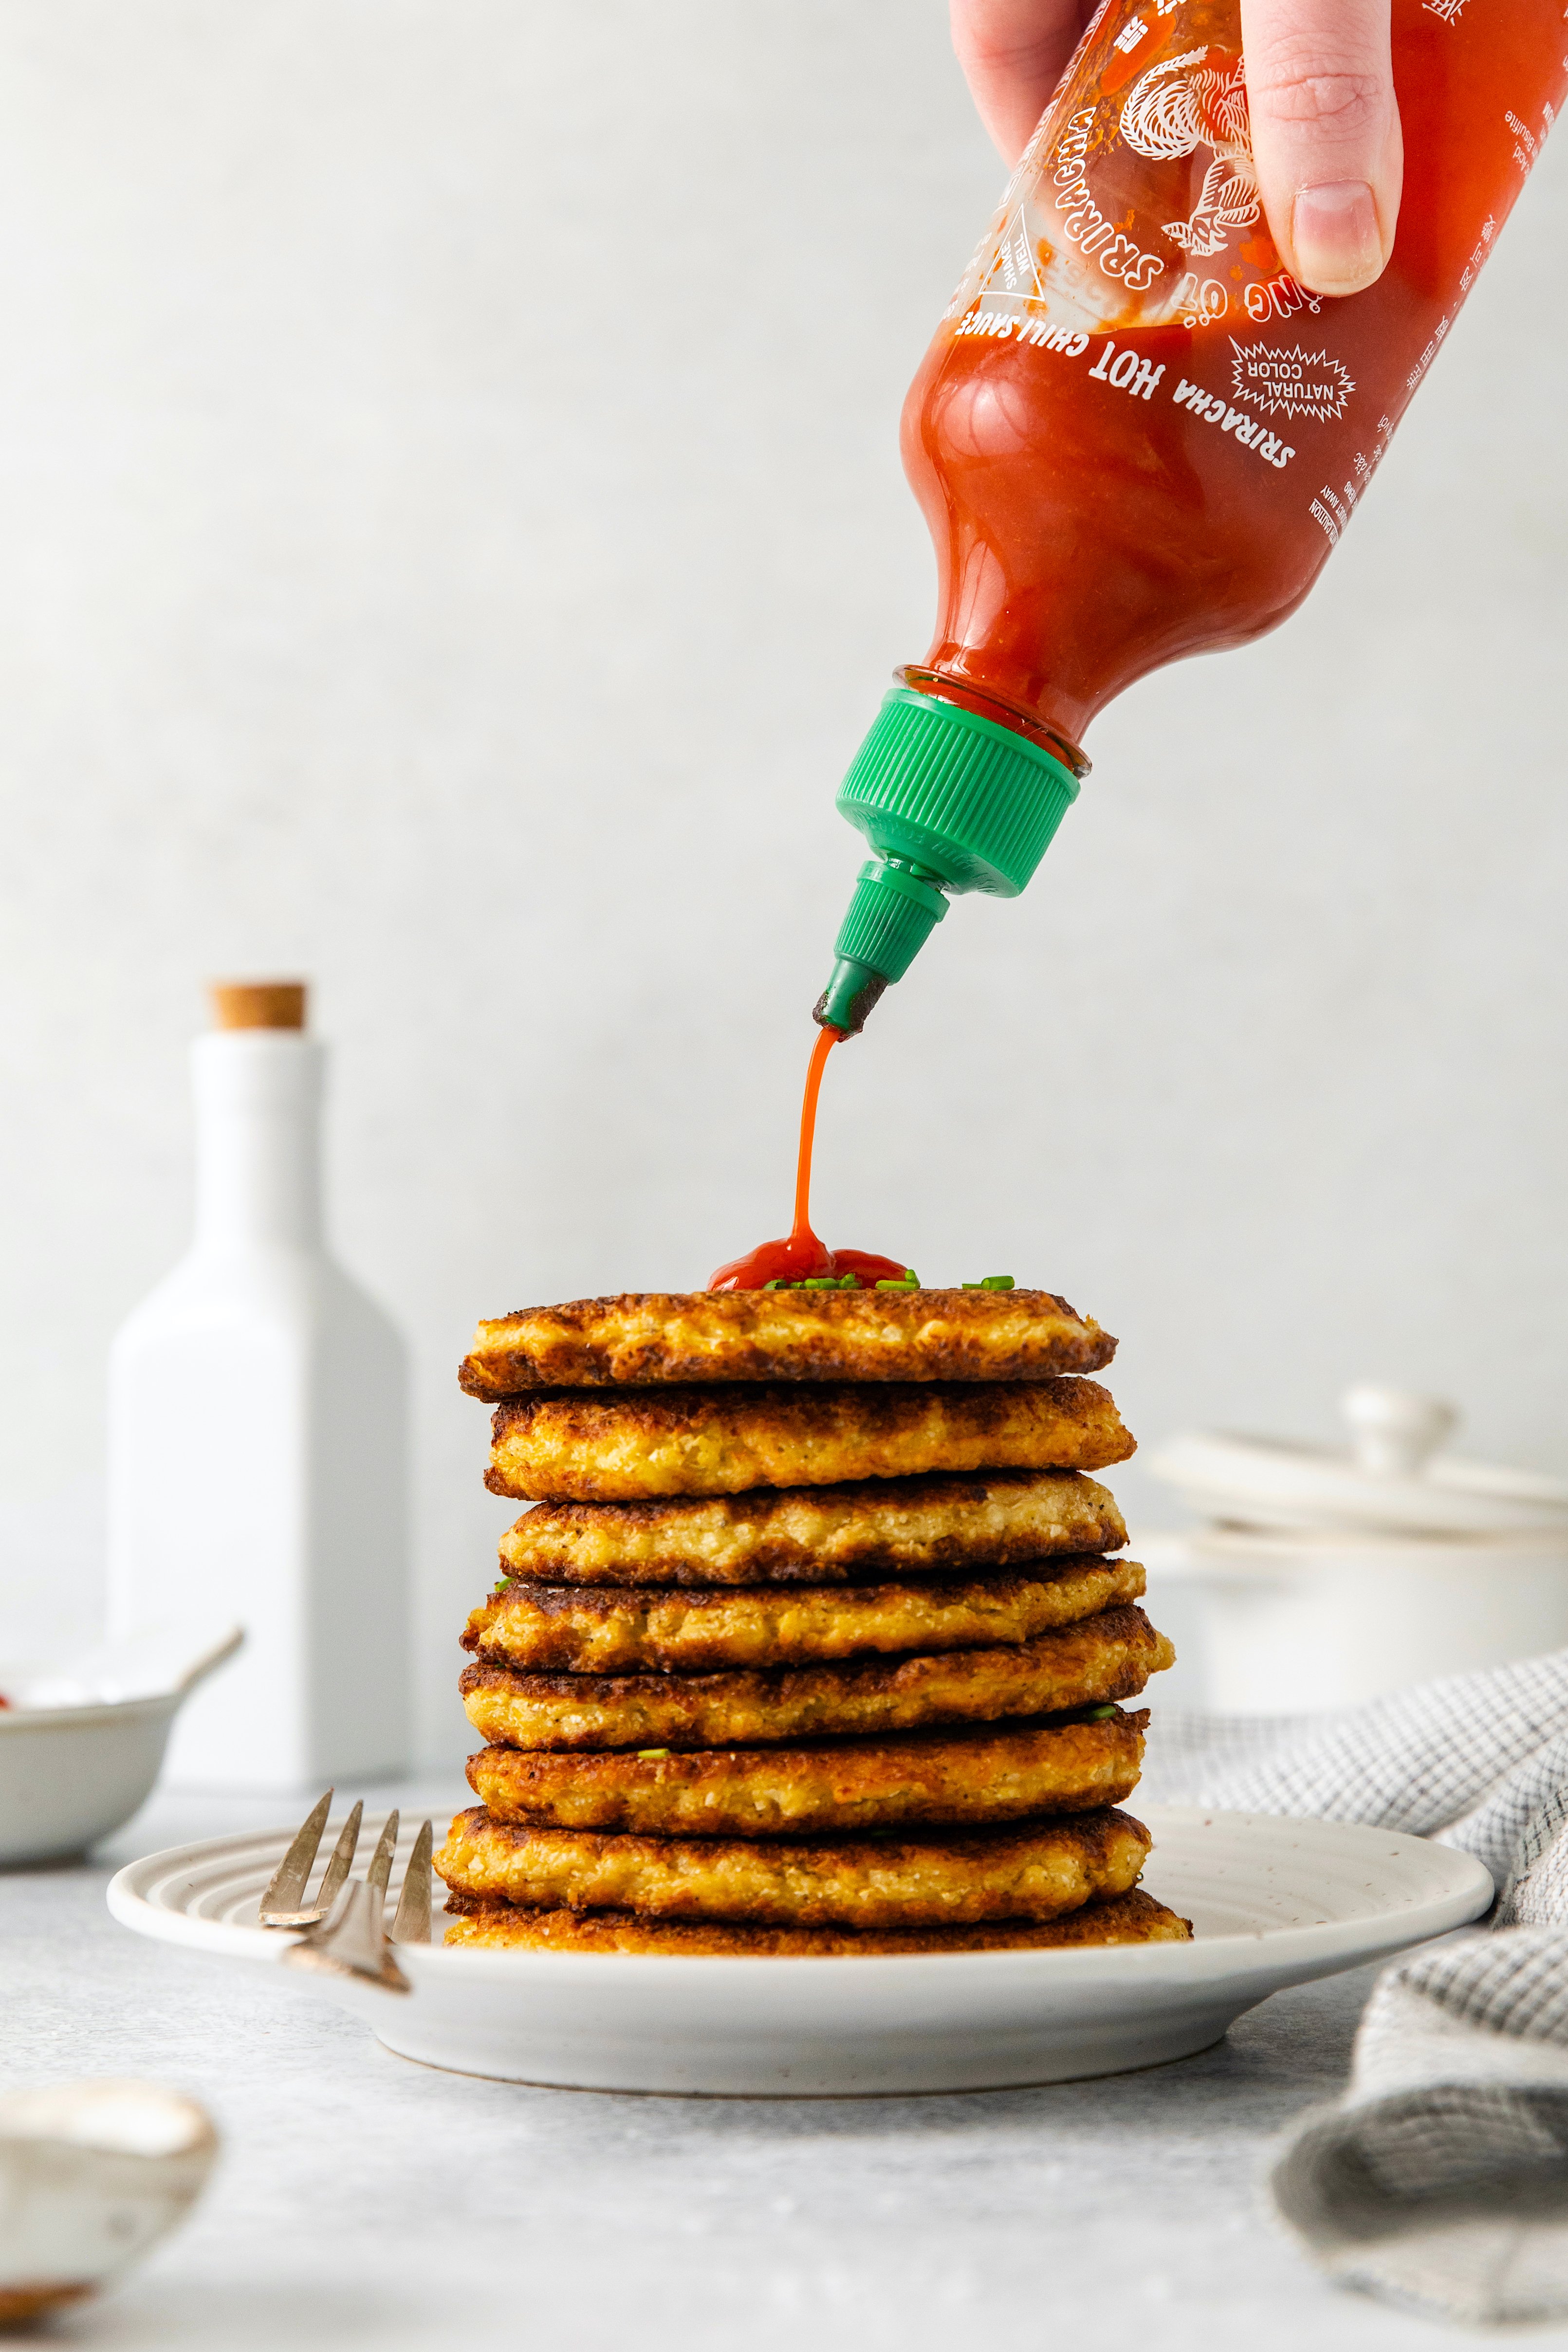 sriracha being drizzled on the top of a stack of hash browns.